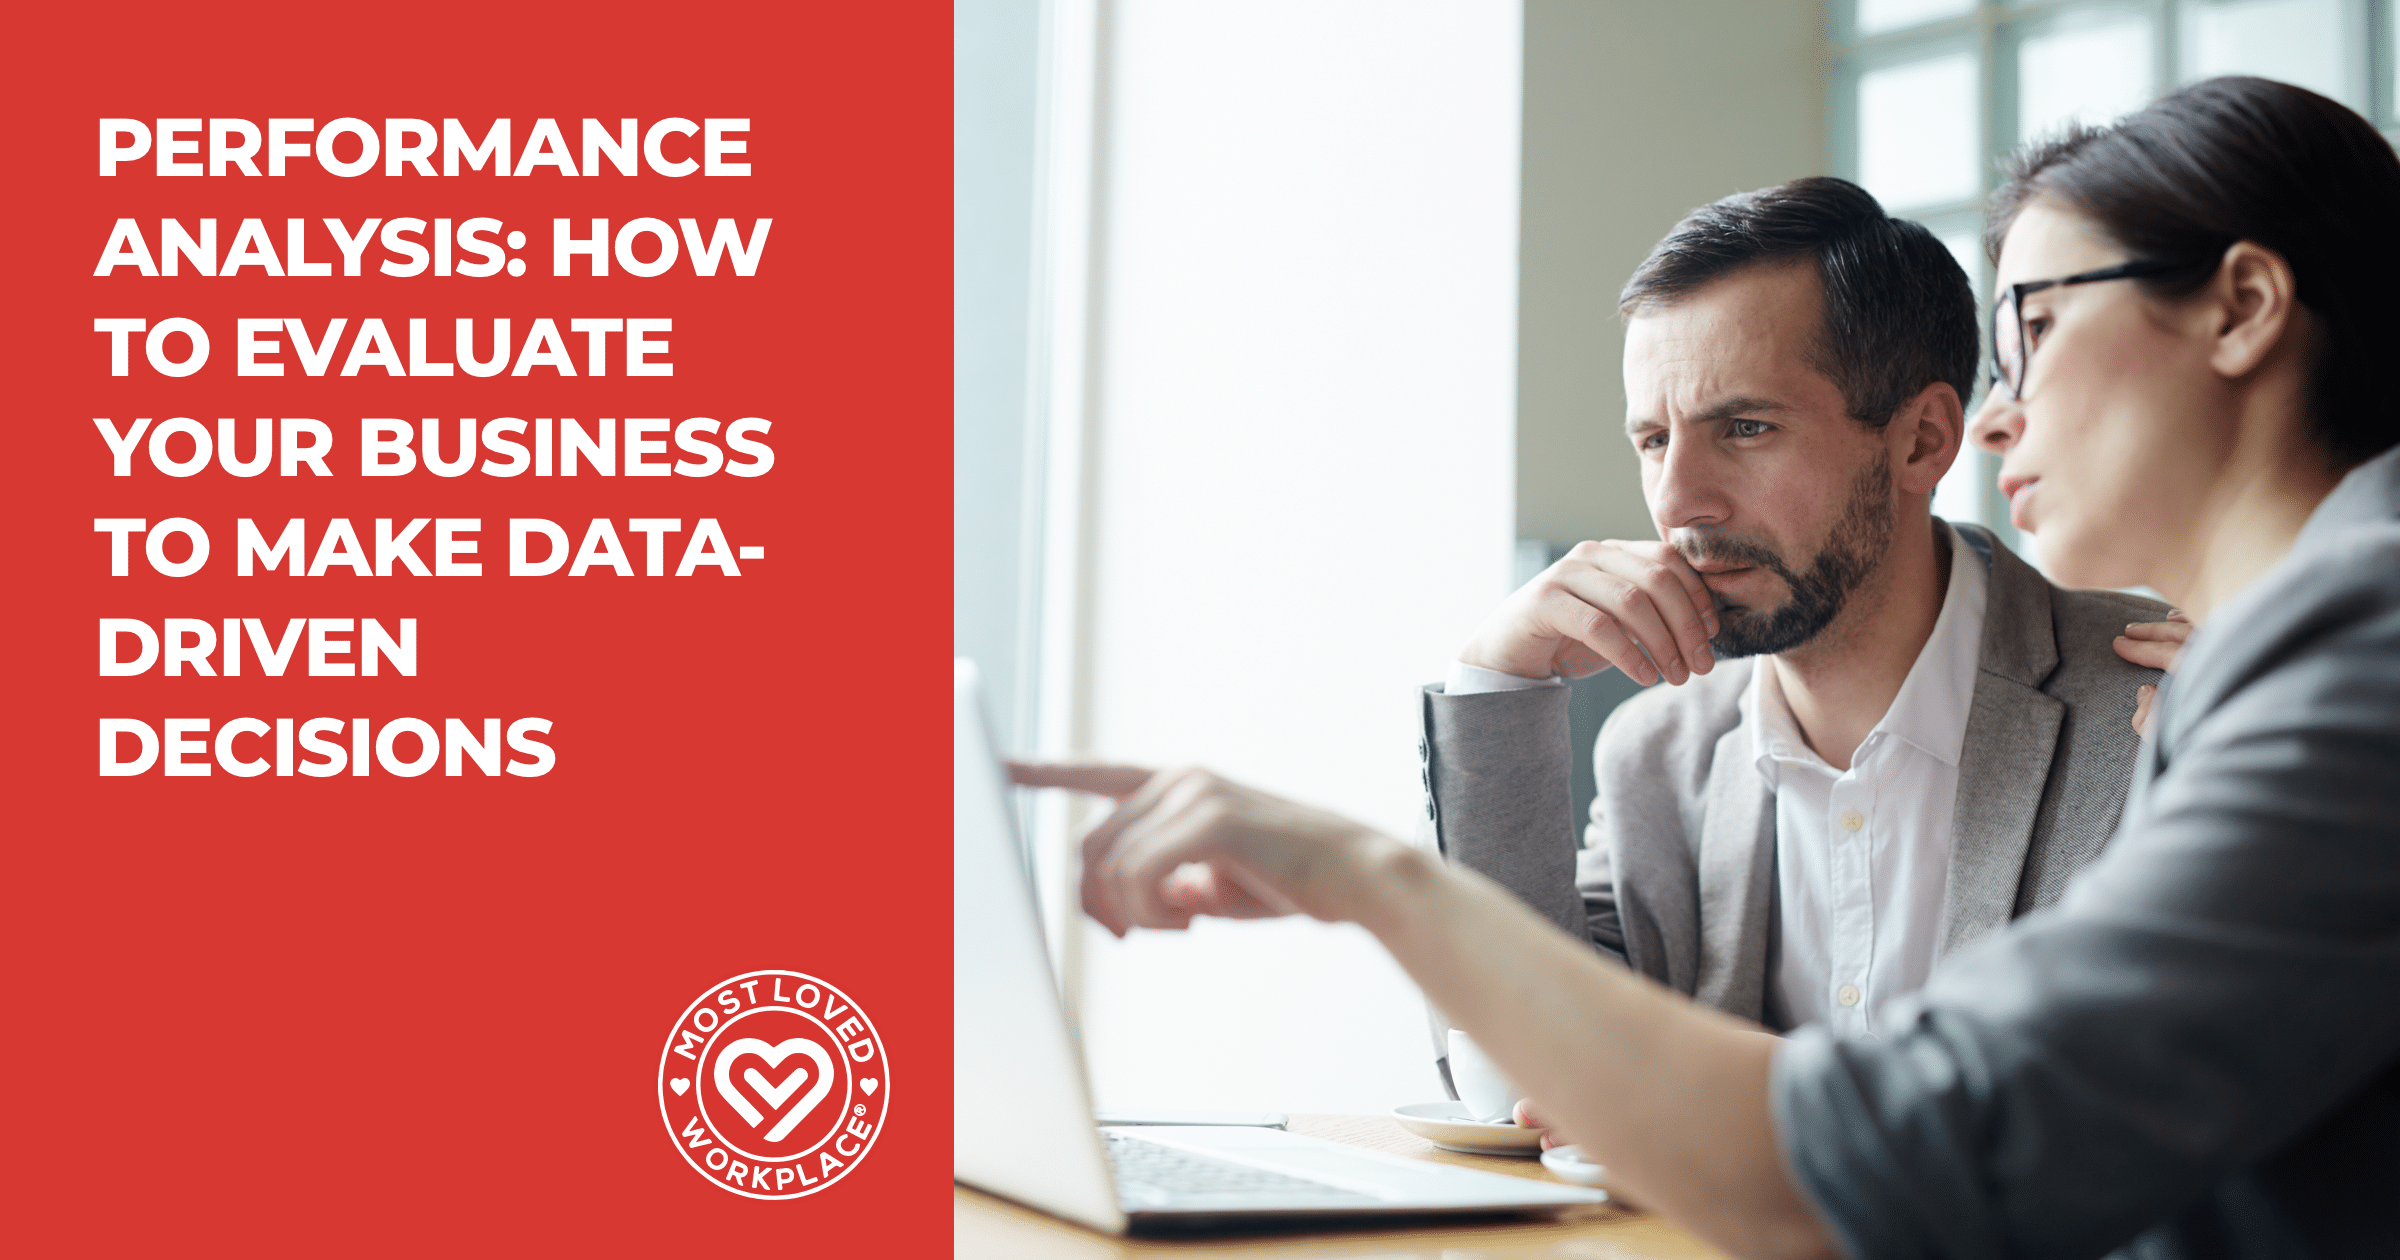 Performance Analysis: How To Evaluate Your Business To Make Data-Driven Decisions